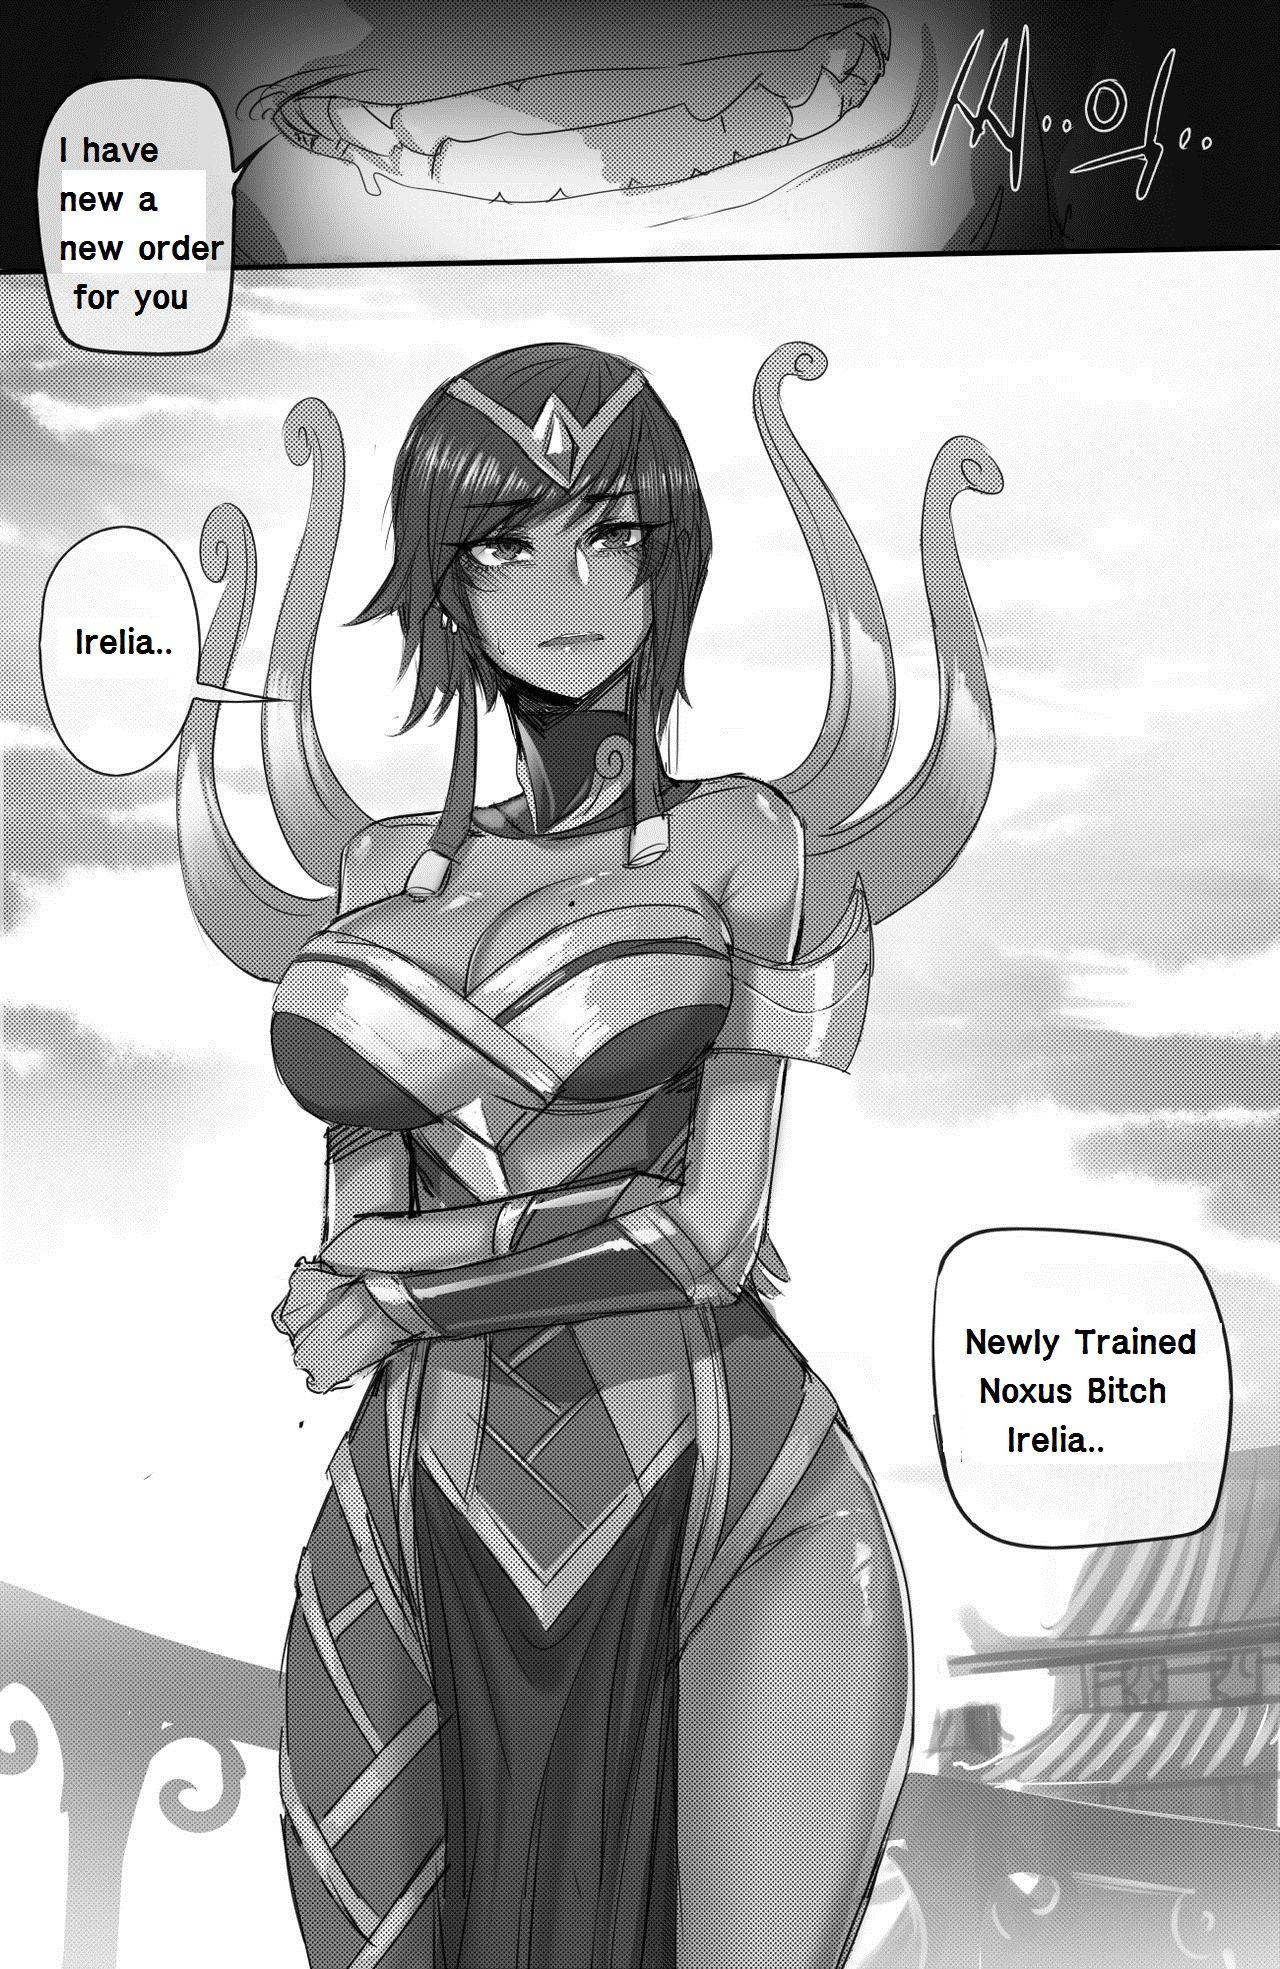 Peeing The Fall of Irelia 2 - League of legends Pervert - Page 24